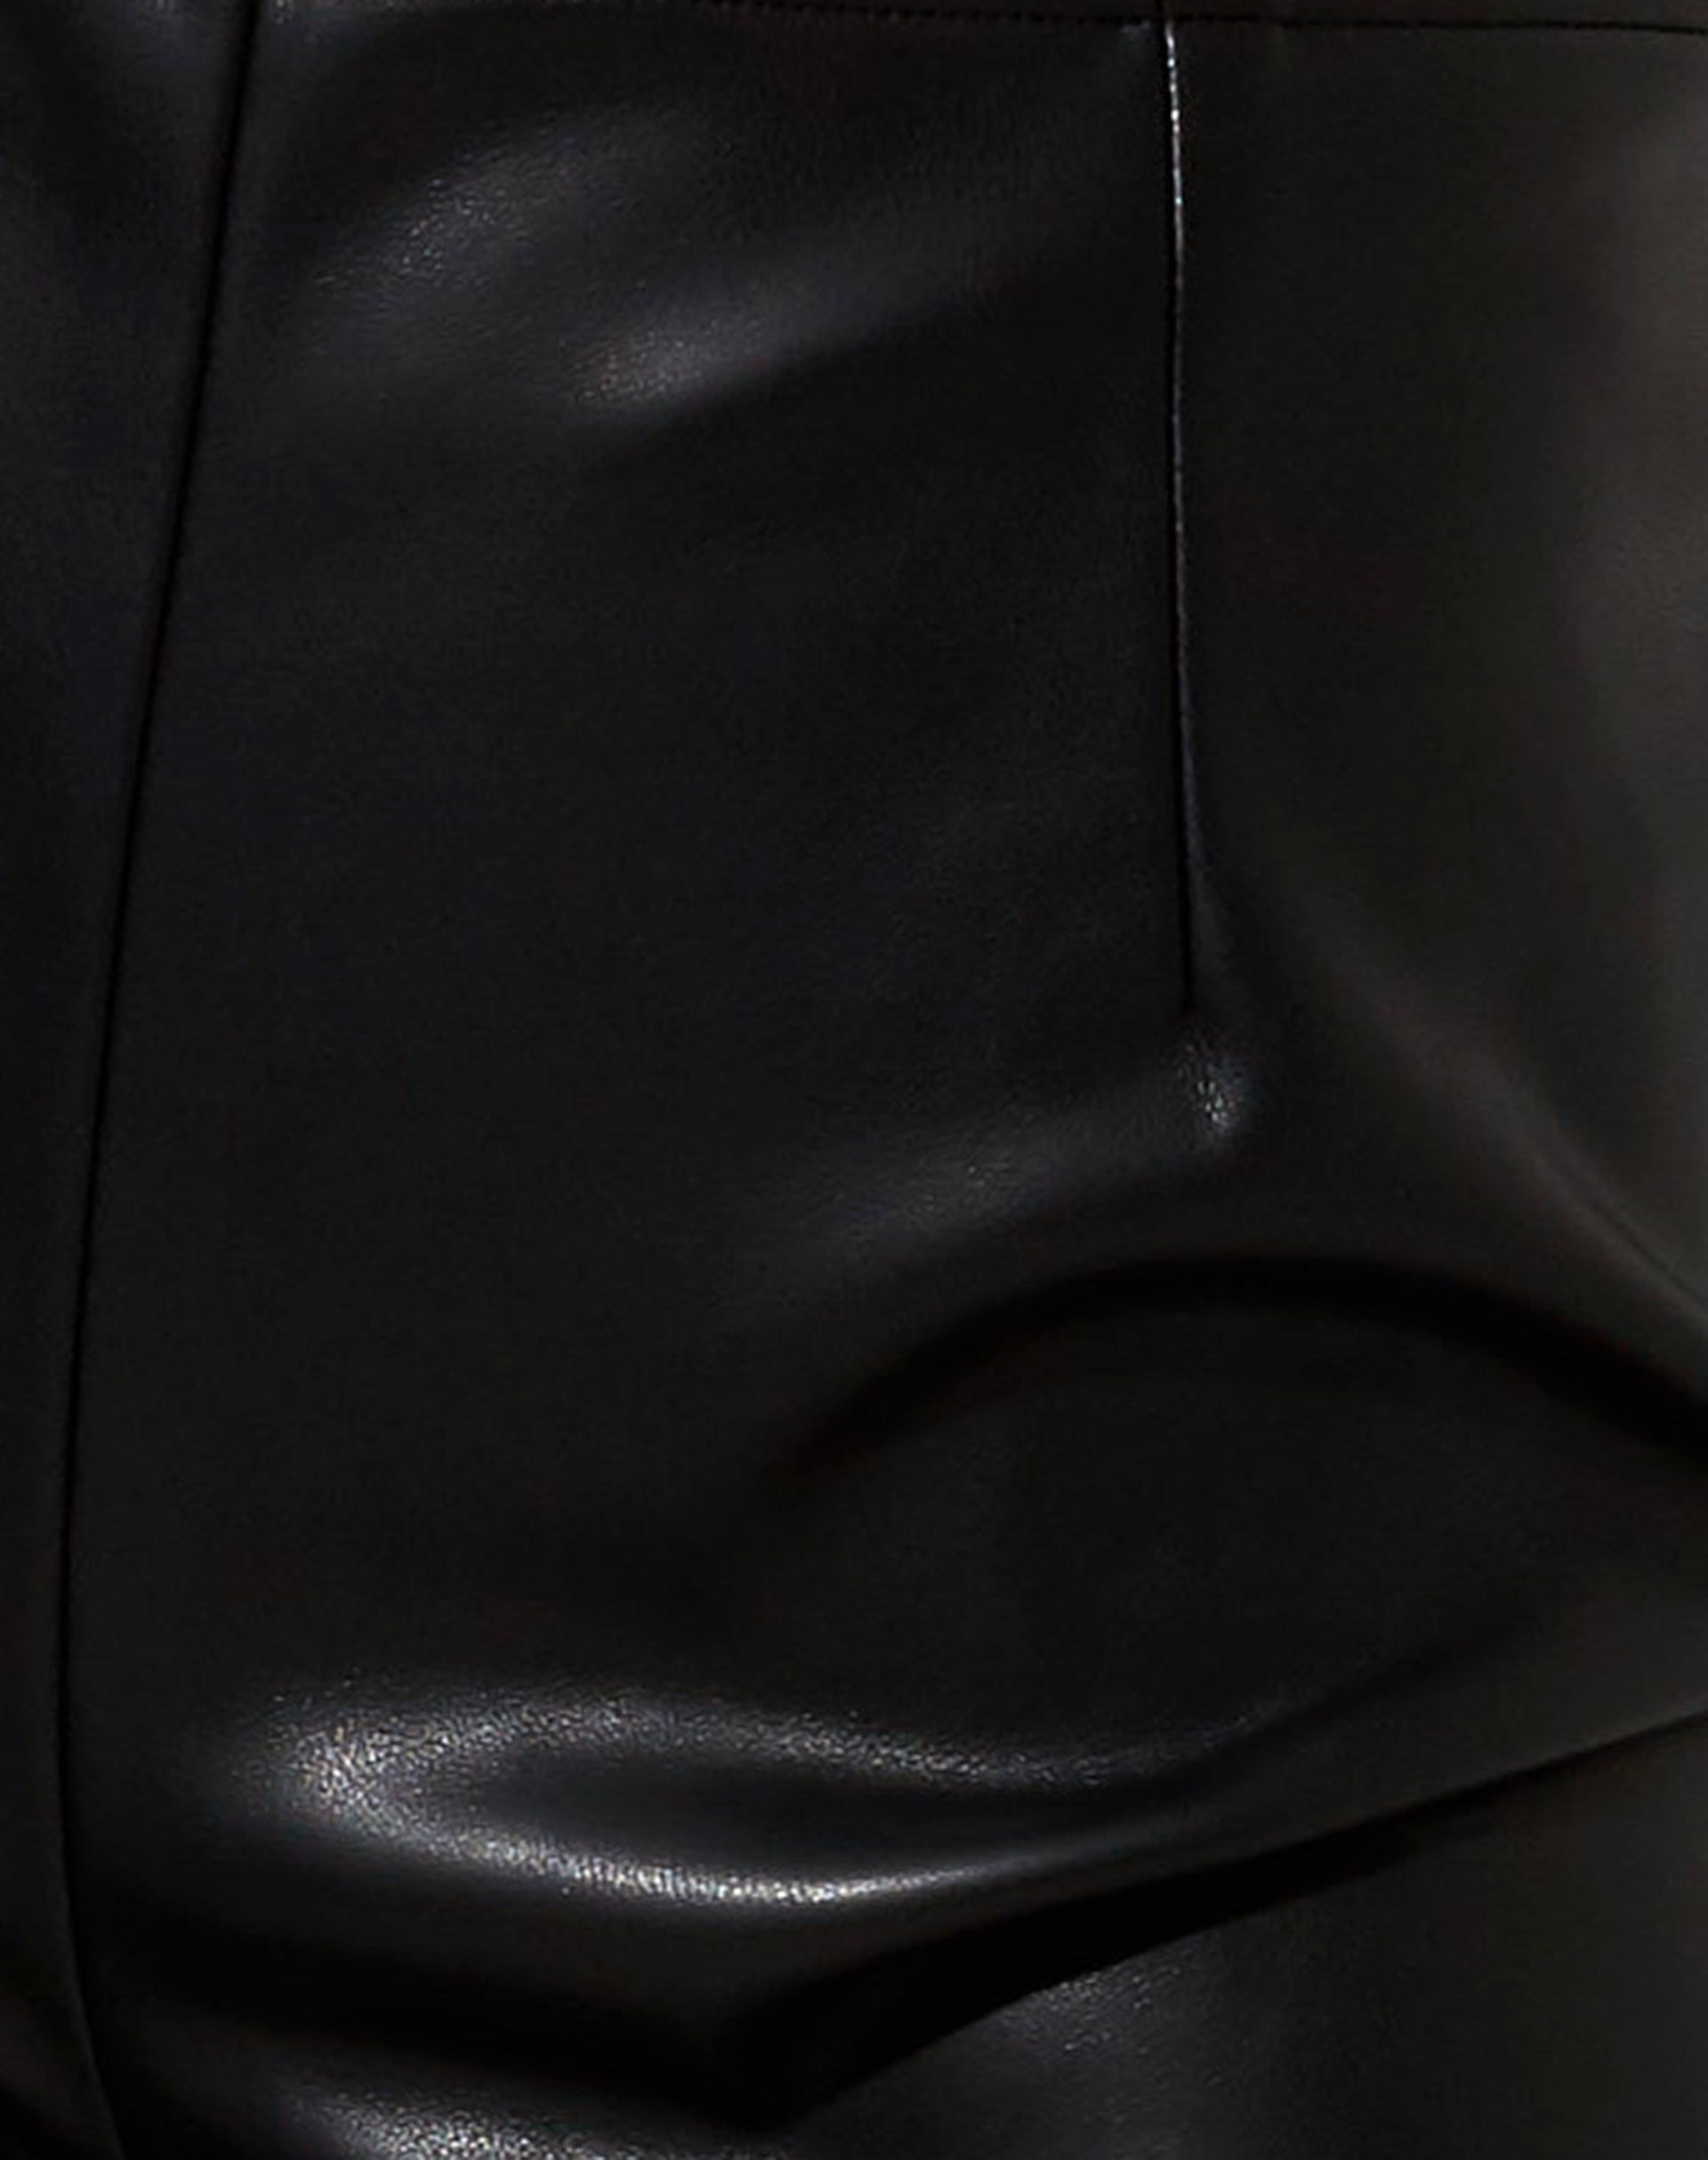 Black Leather Flared Trousers